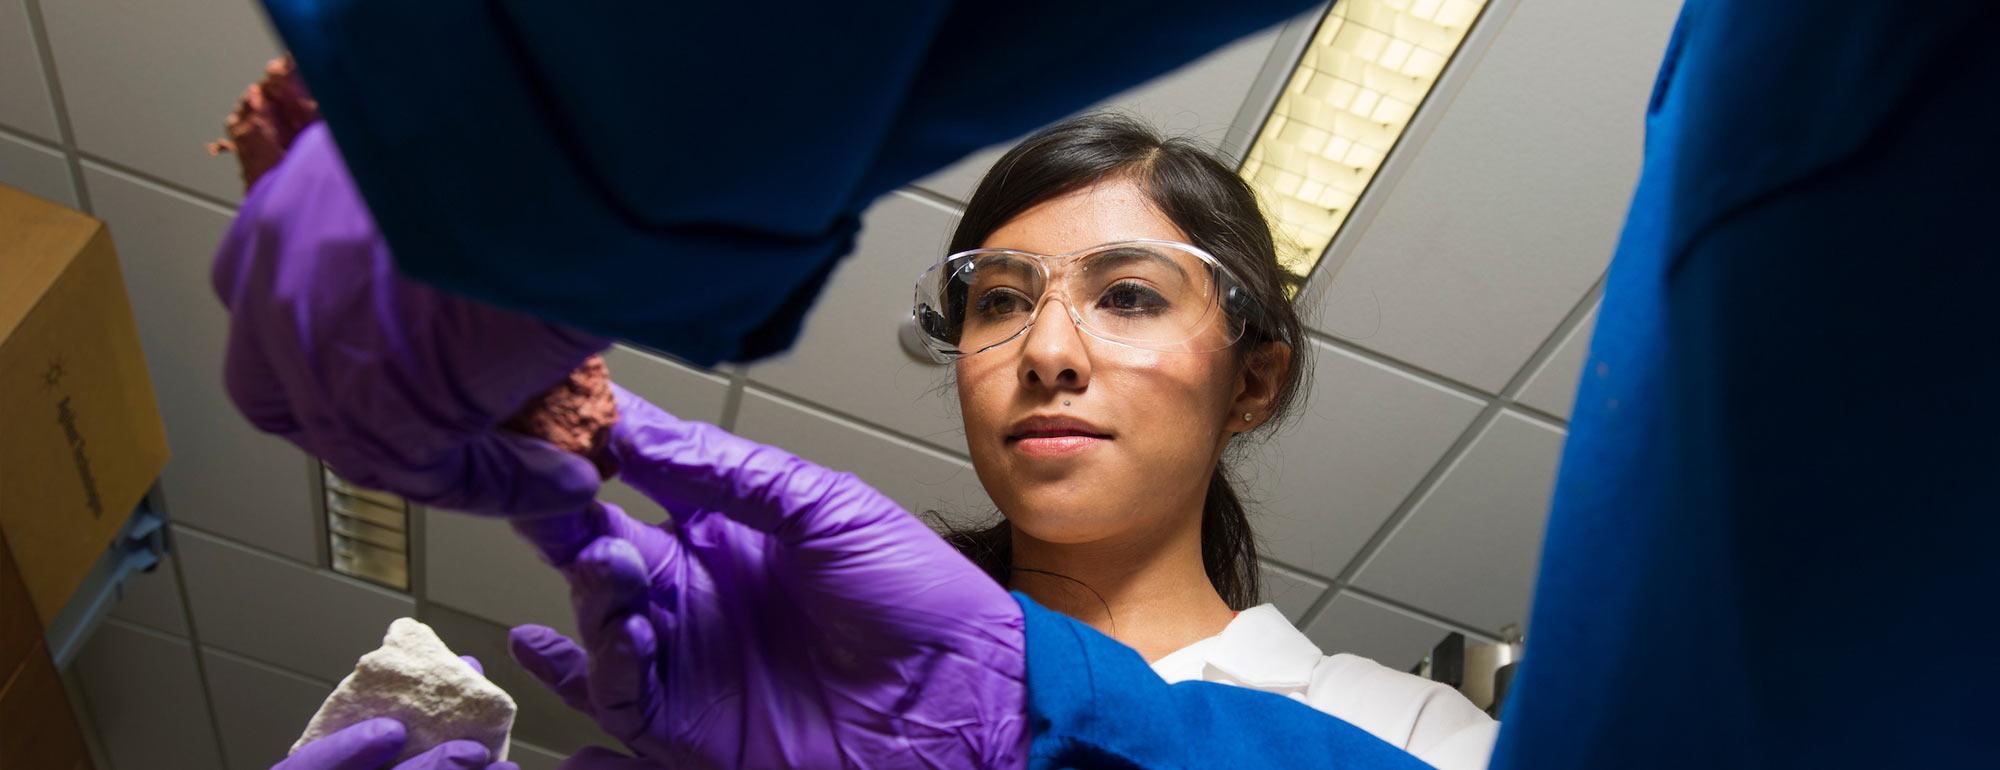 A female student works with a researcher in a lab on the ˽̳ Davis campus